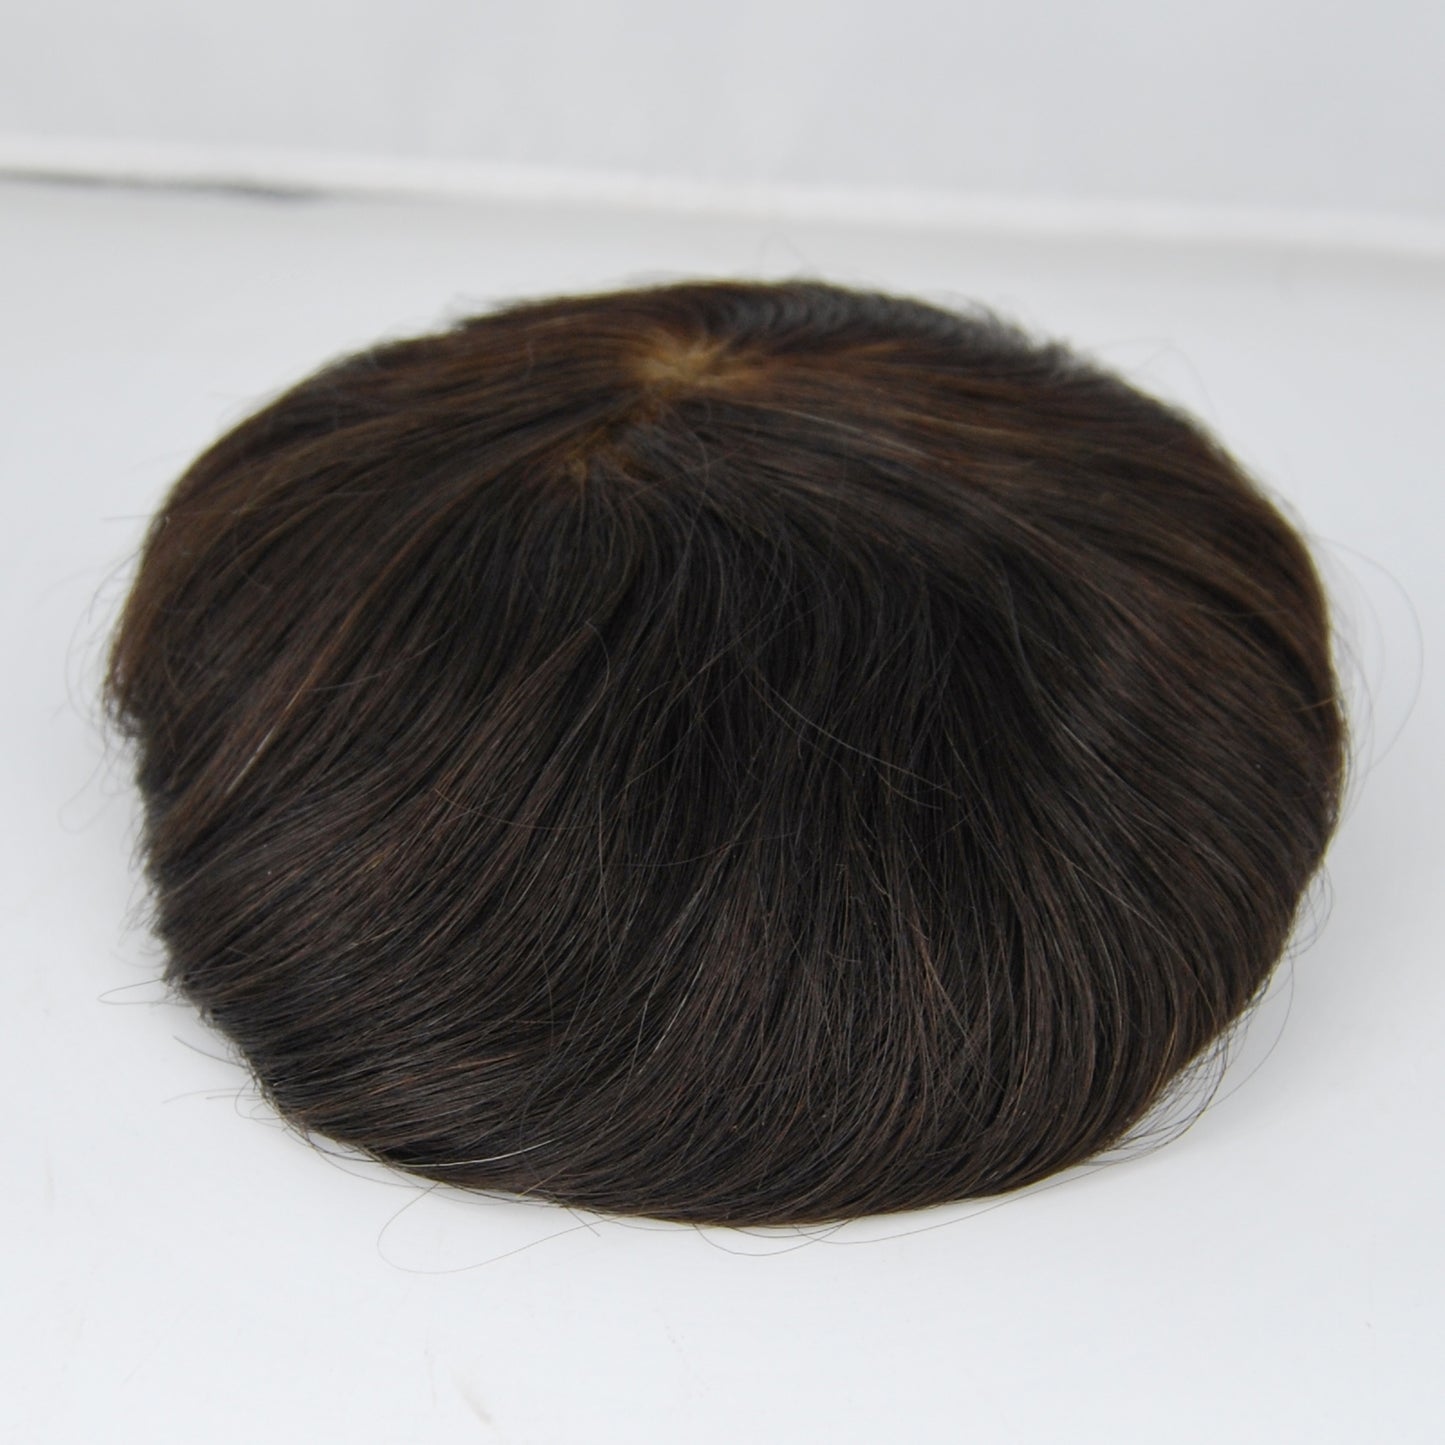 Clearance toupee natural black 8*5“ prosthesis for men bleach all French lacemen's hair replacement